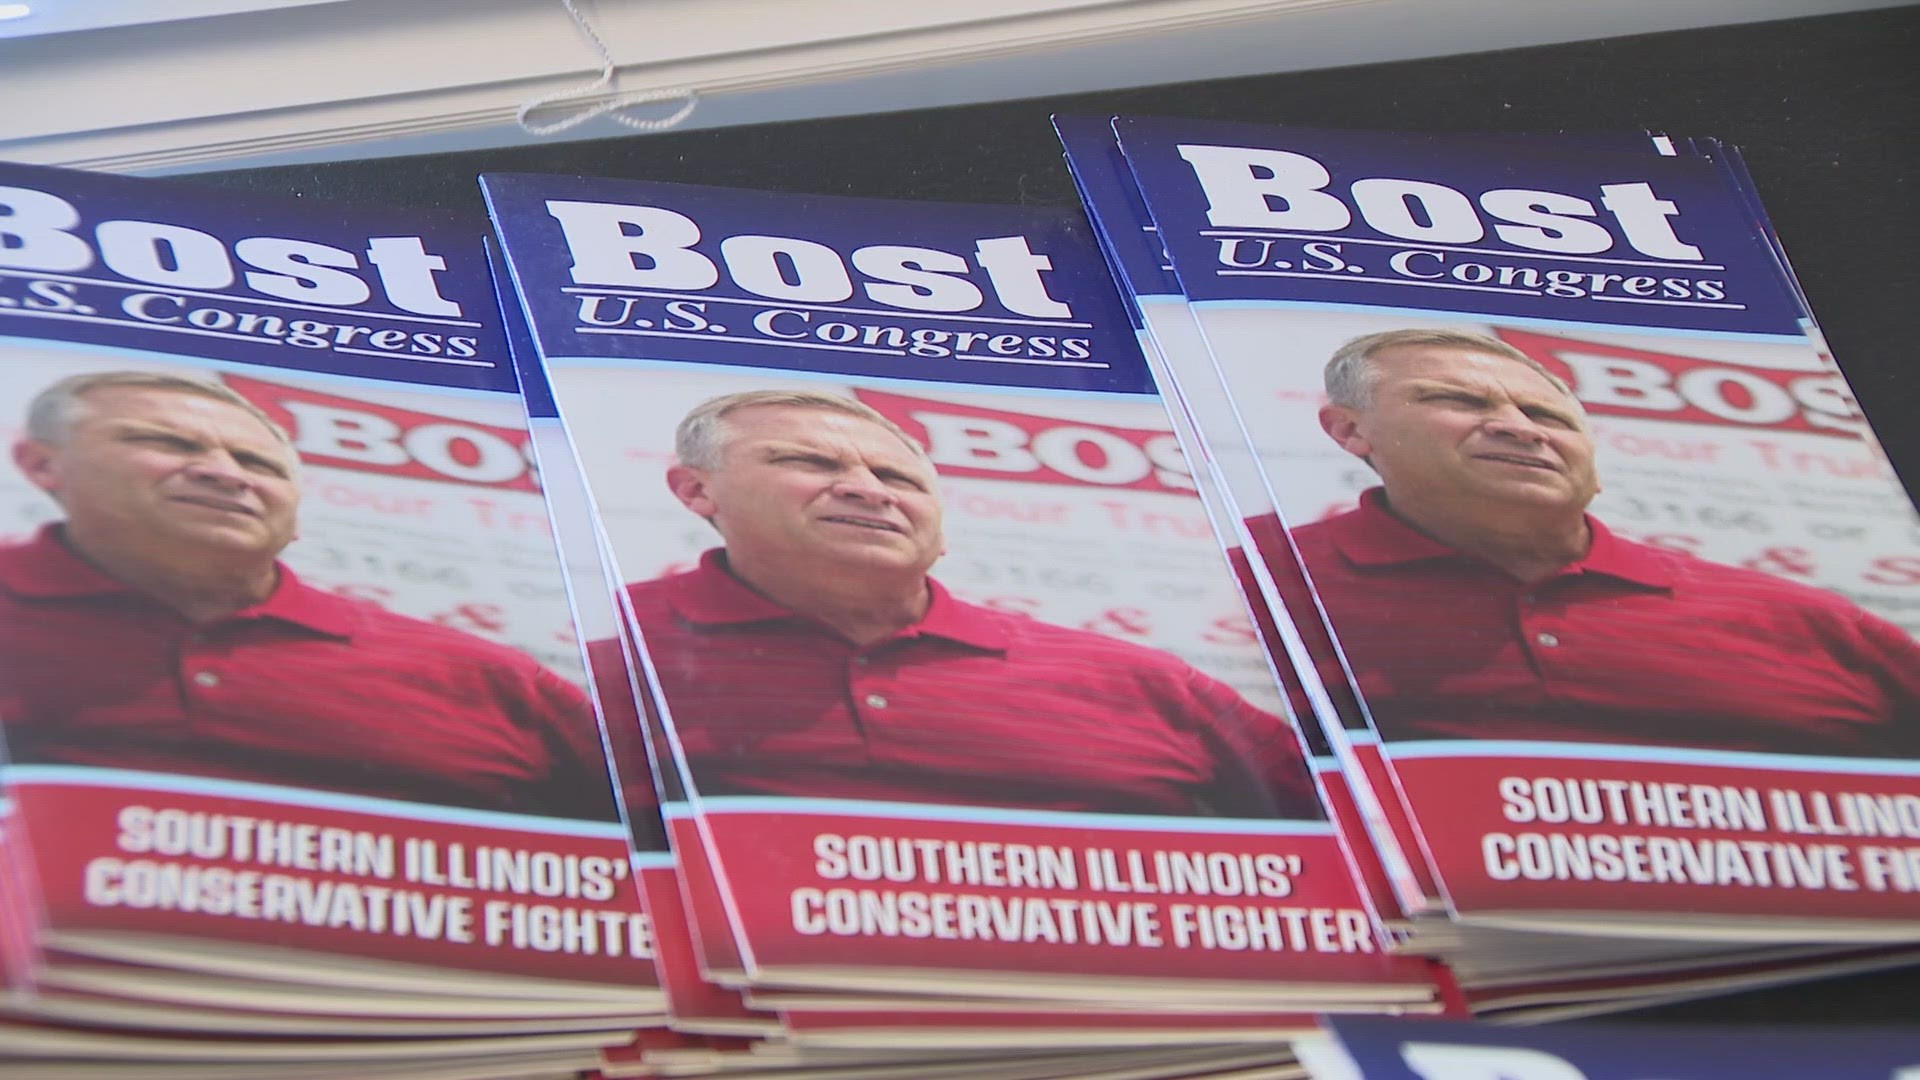 Illinois Republicans will decide one of the most hotly contested primary races for Congress tomorrow. Darren Bailey is attempting to oust Congressman Mike Bost.